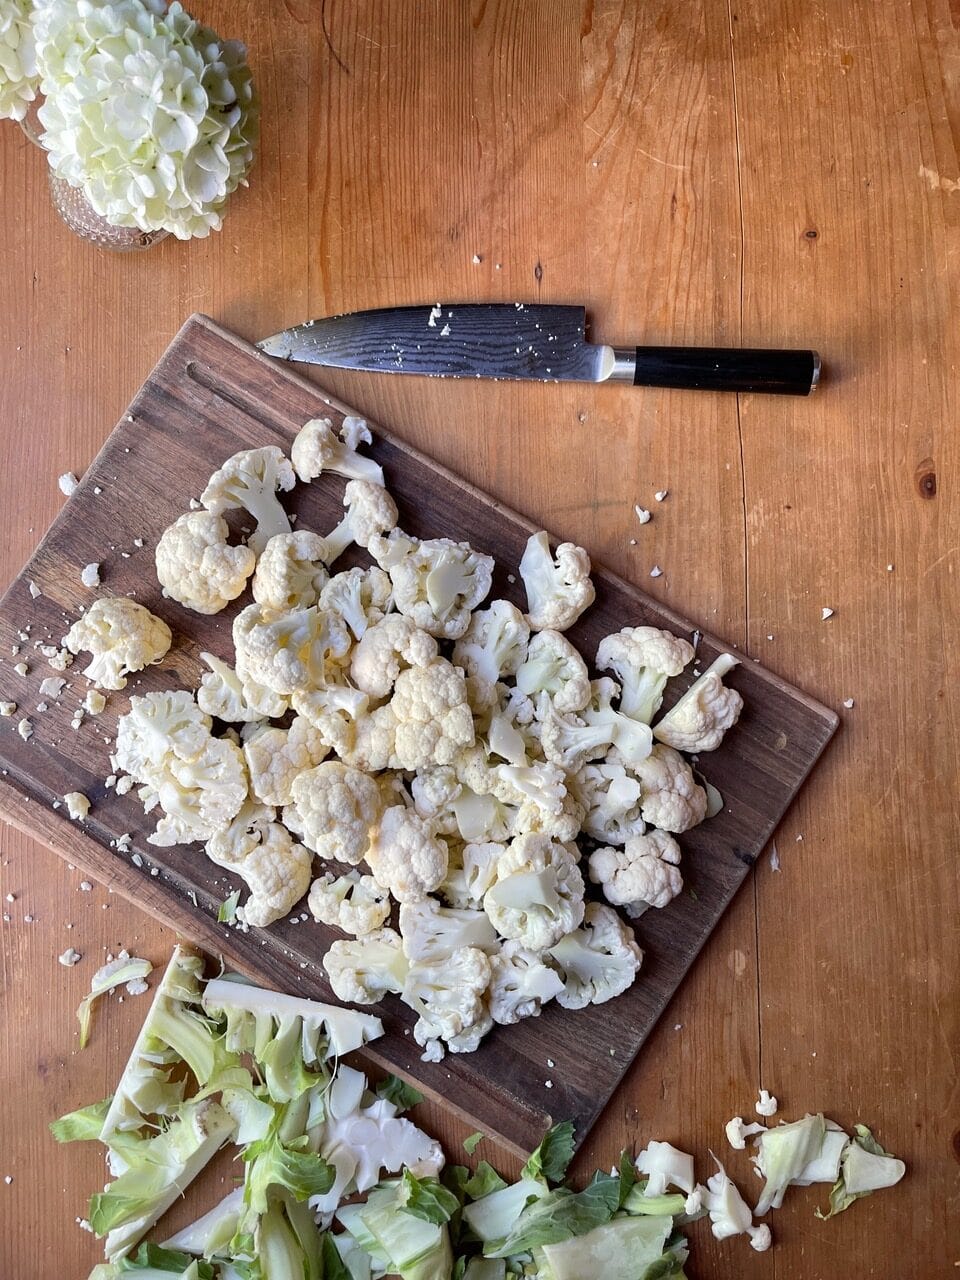 bite-sized cauliflower florets, cored, on wooden cutting board with knife and trimmings